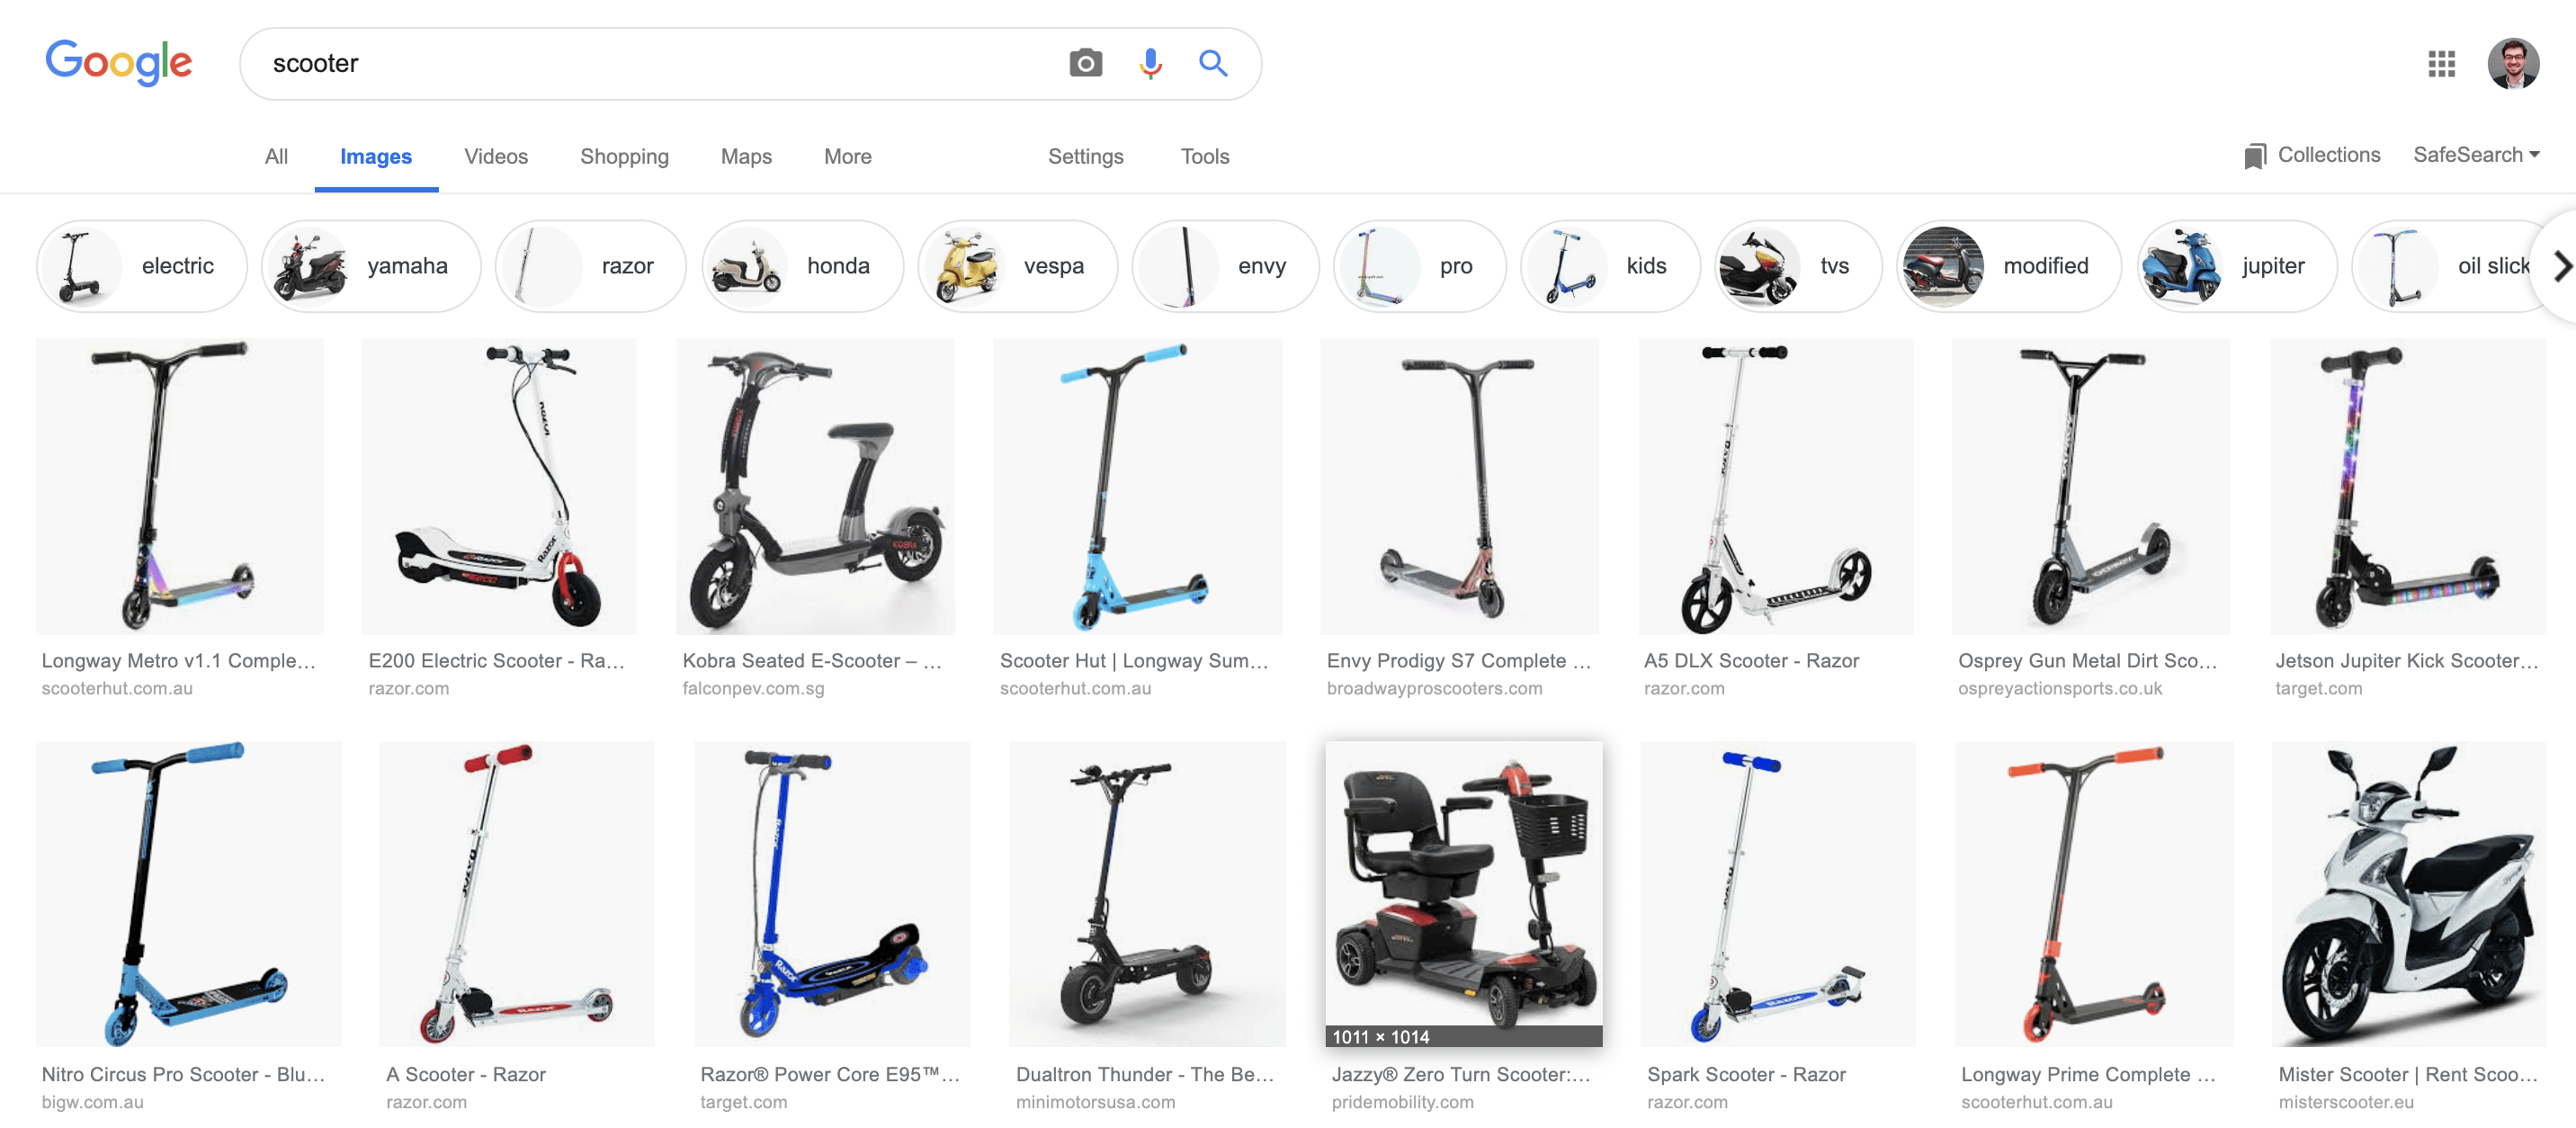 What is a scooter?